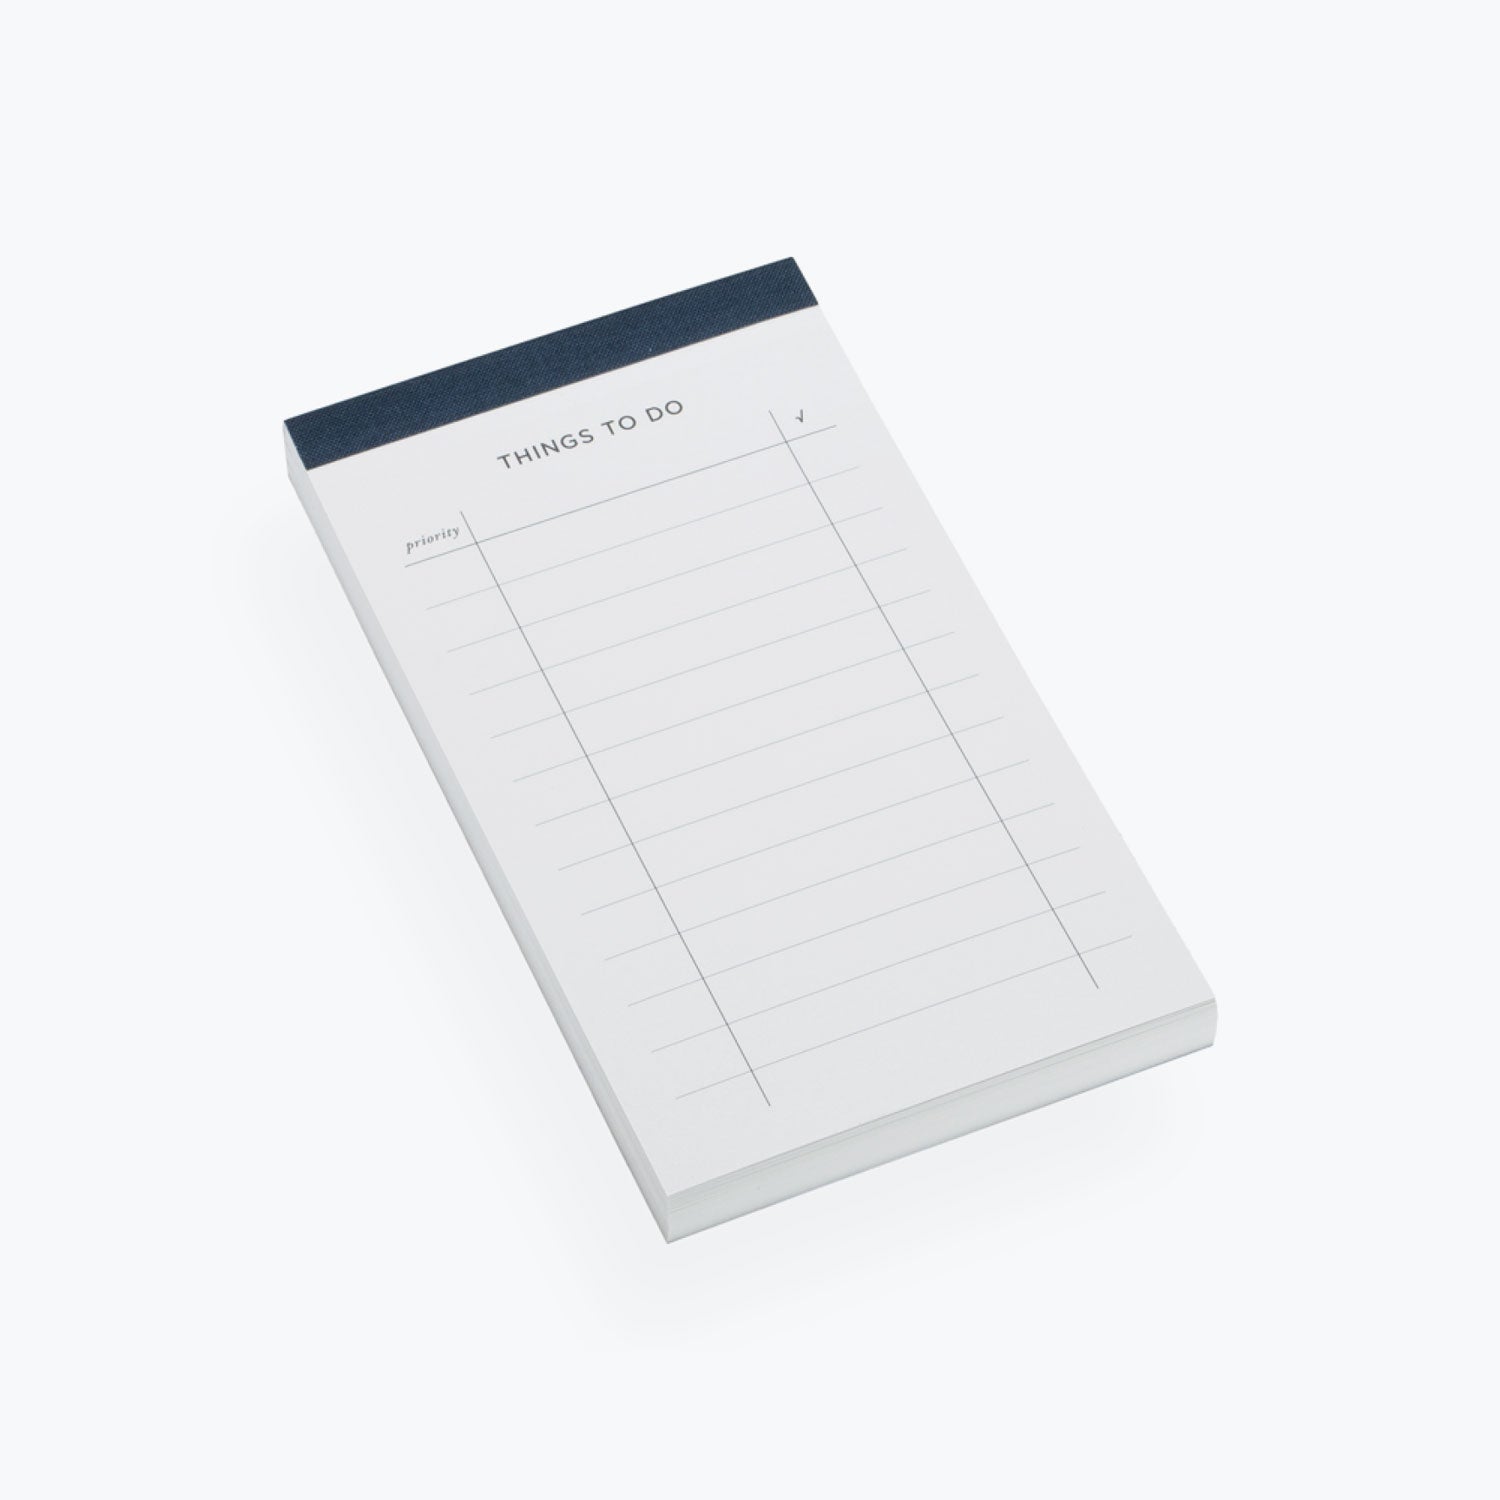 Bookbinders Design - Planner - To Do List - Smoke Blue